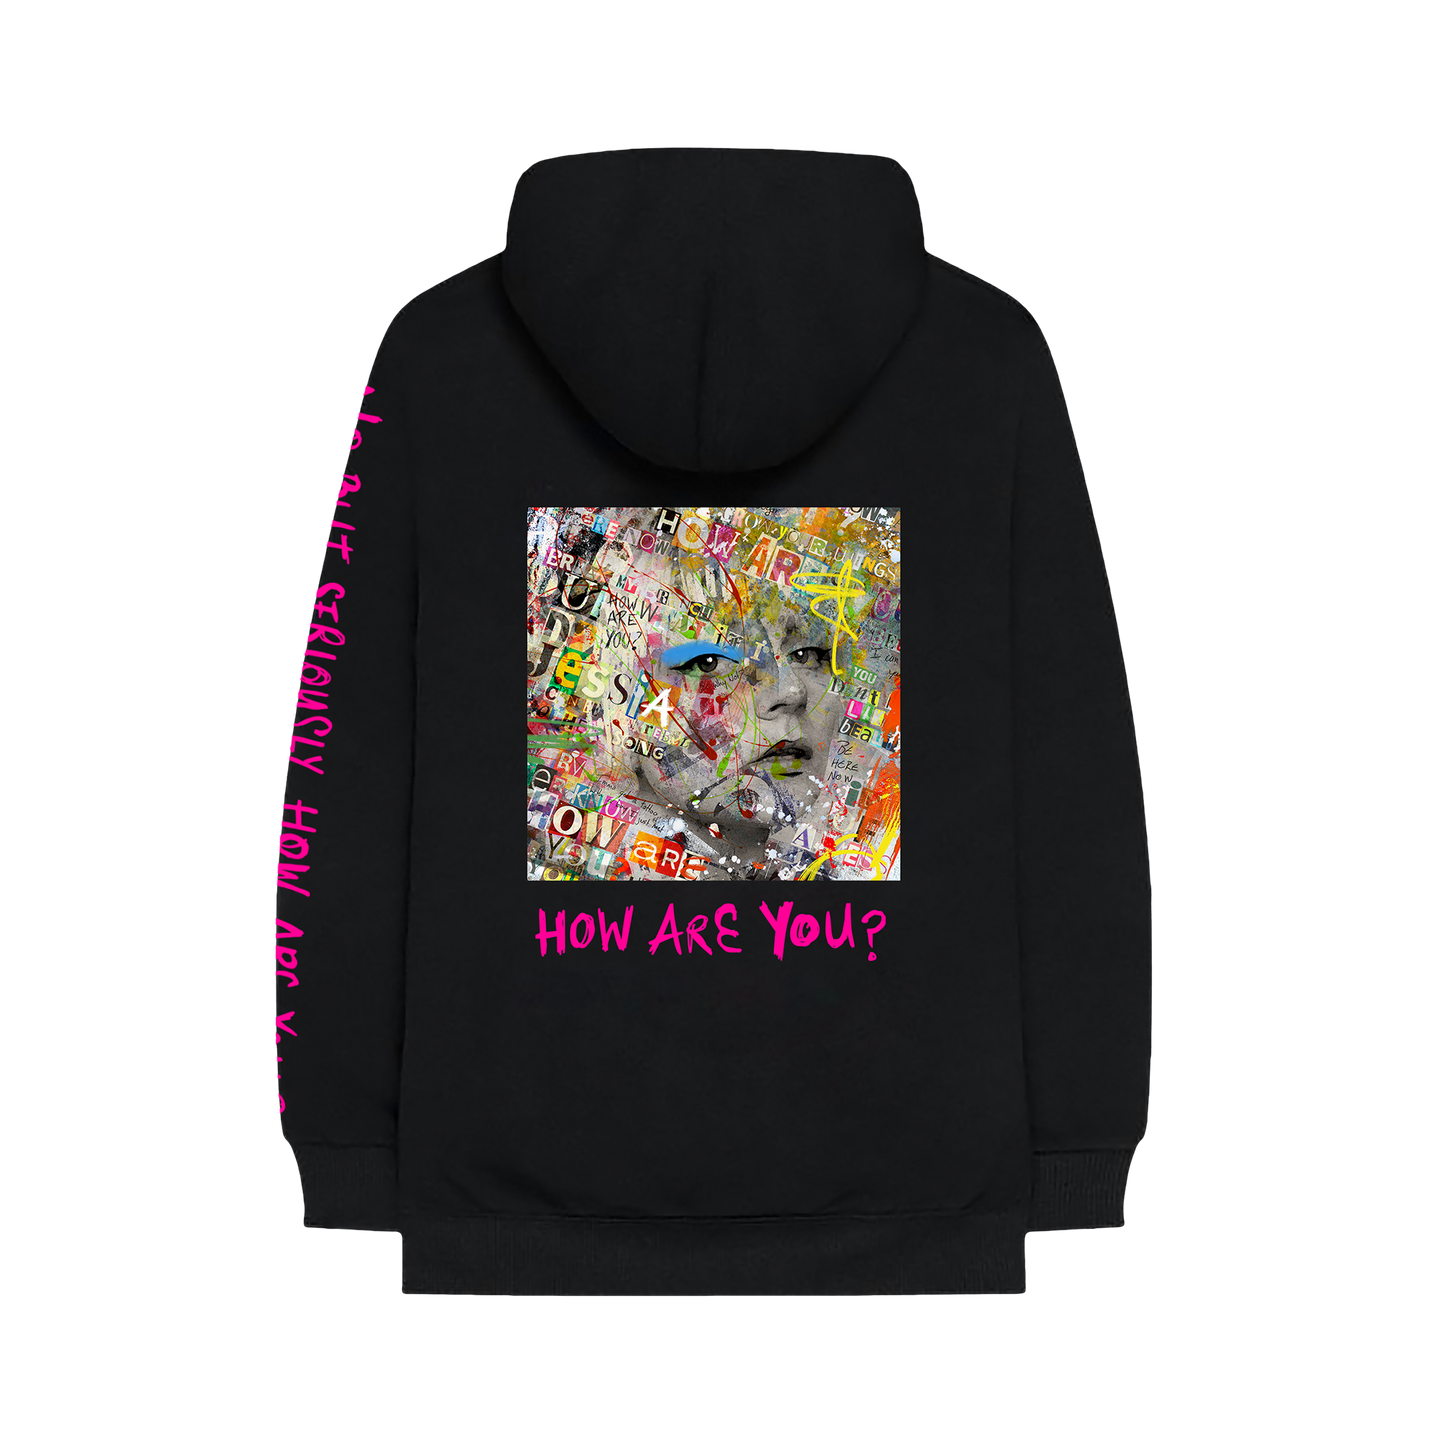 How Are You? EP Art Hoodie - Black